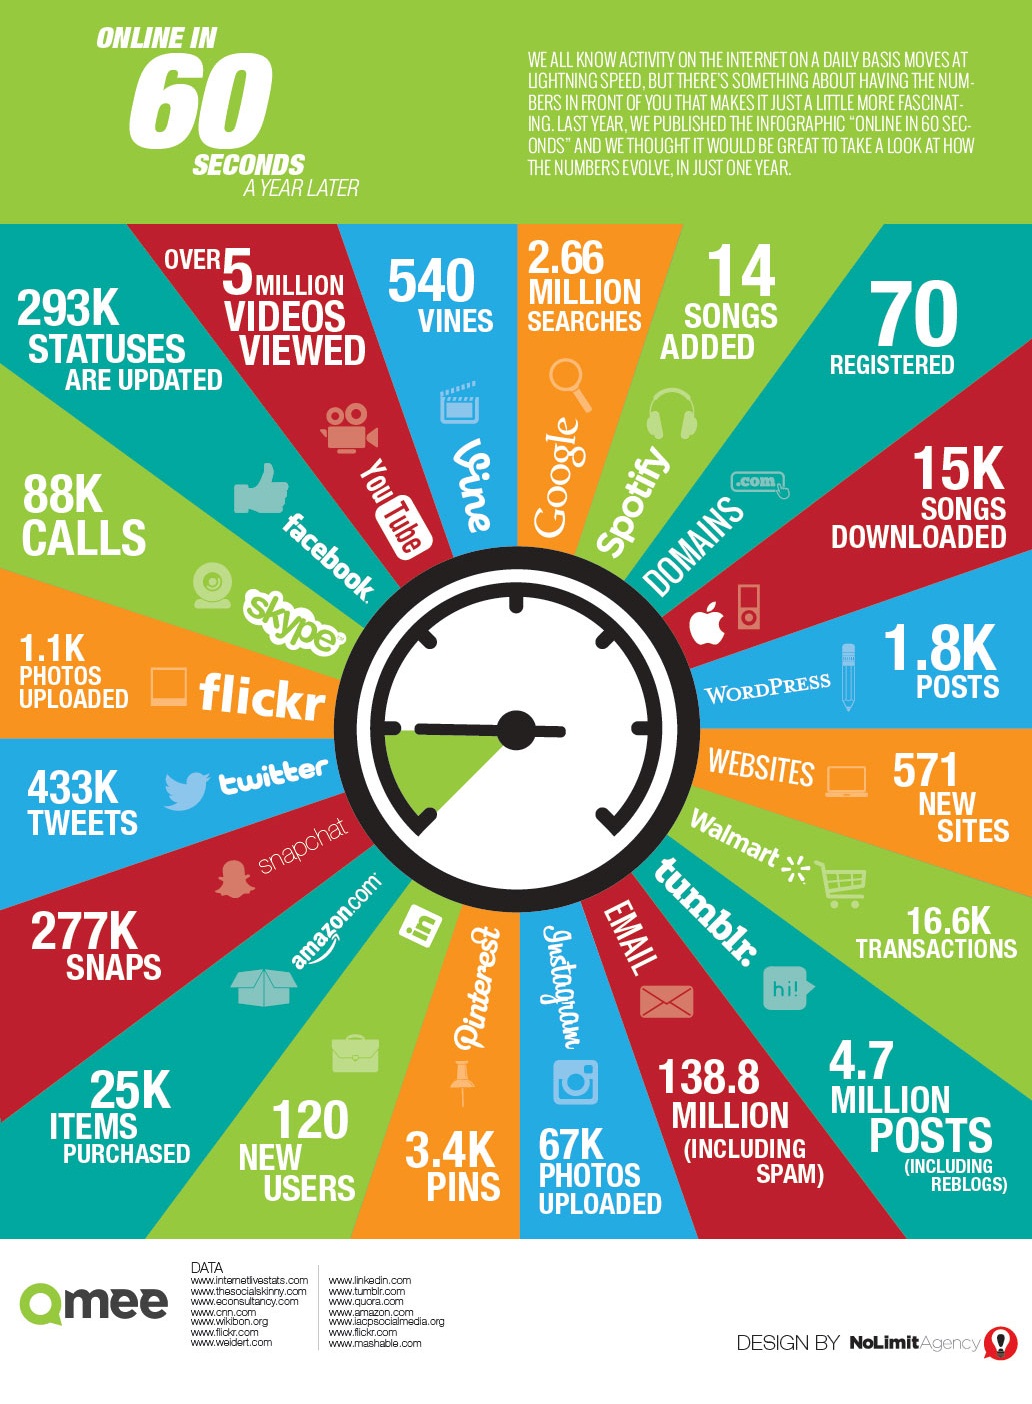 What Happens Every 60 Seconds Online